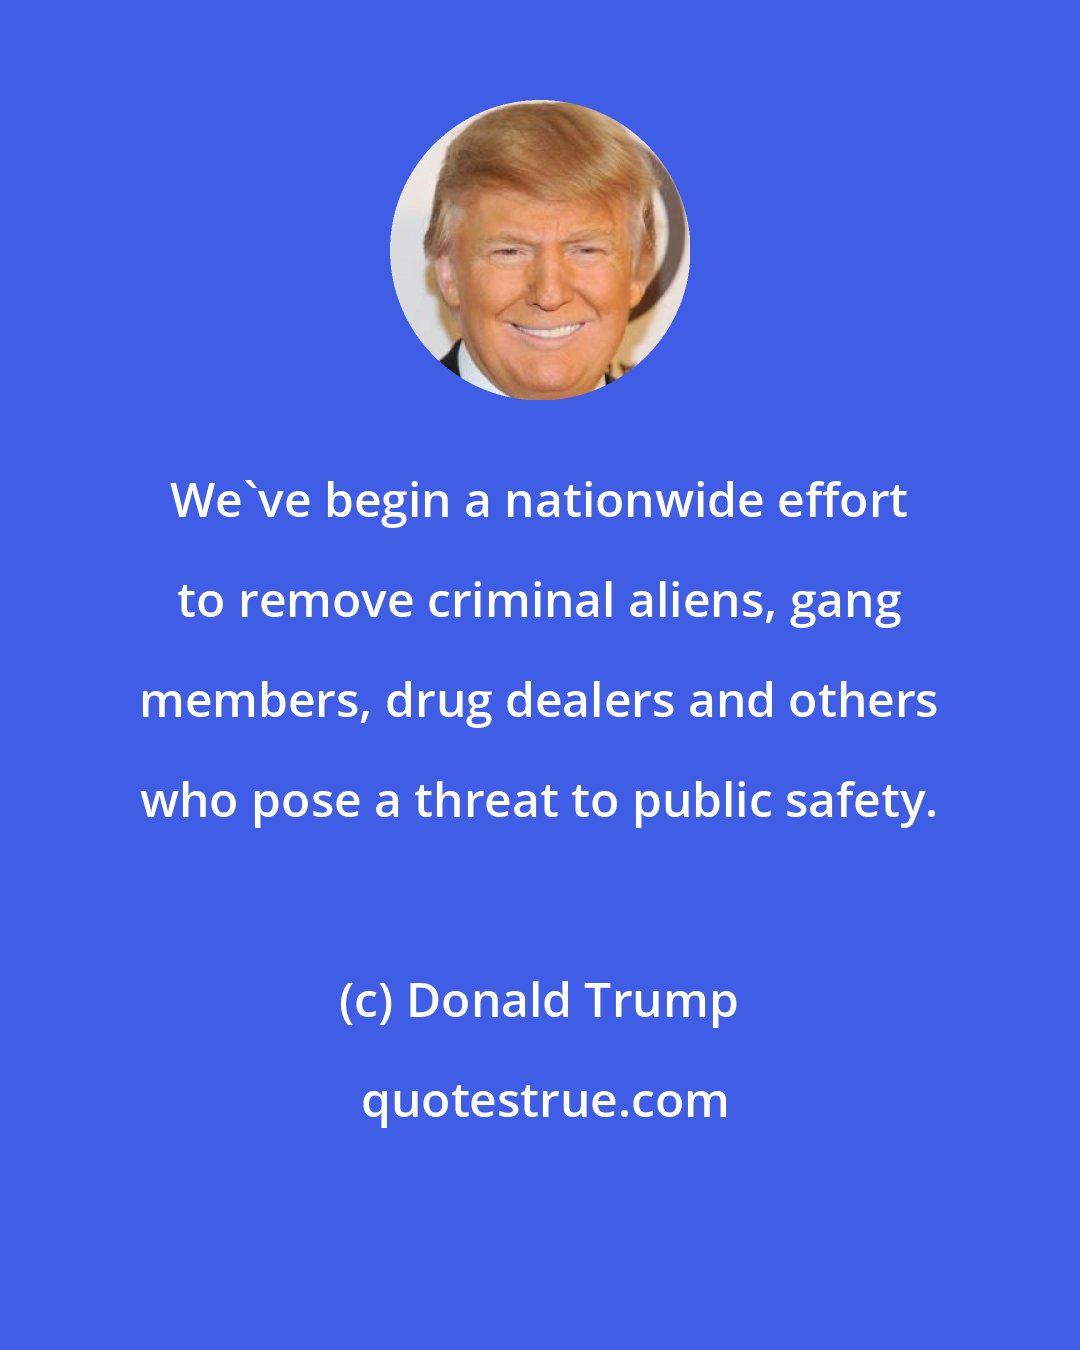 Donald Trump: We've begin a nationwide effort to remove criminal aliens, gang members, drug dealers and others who pose a threat to public safety.